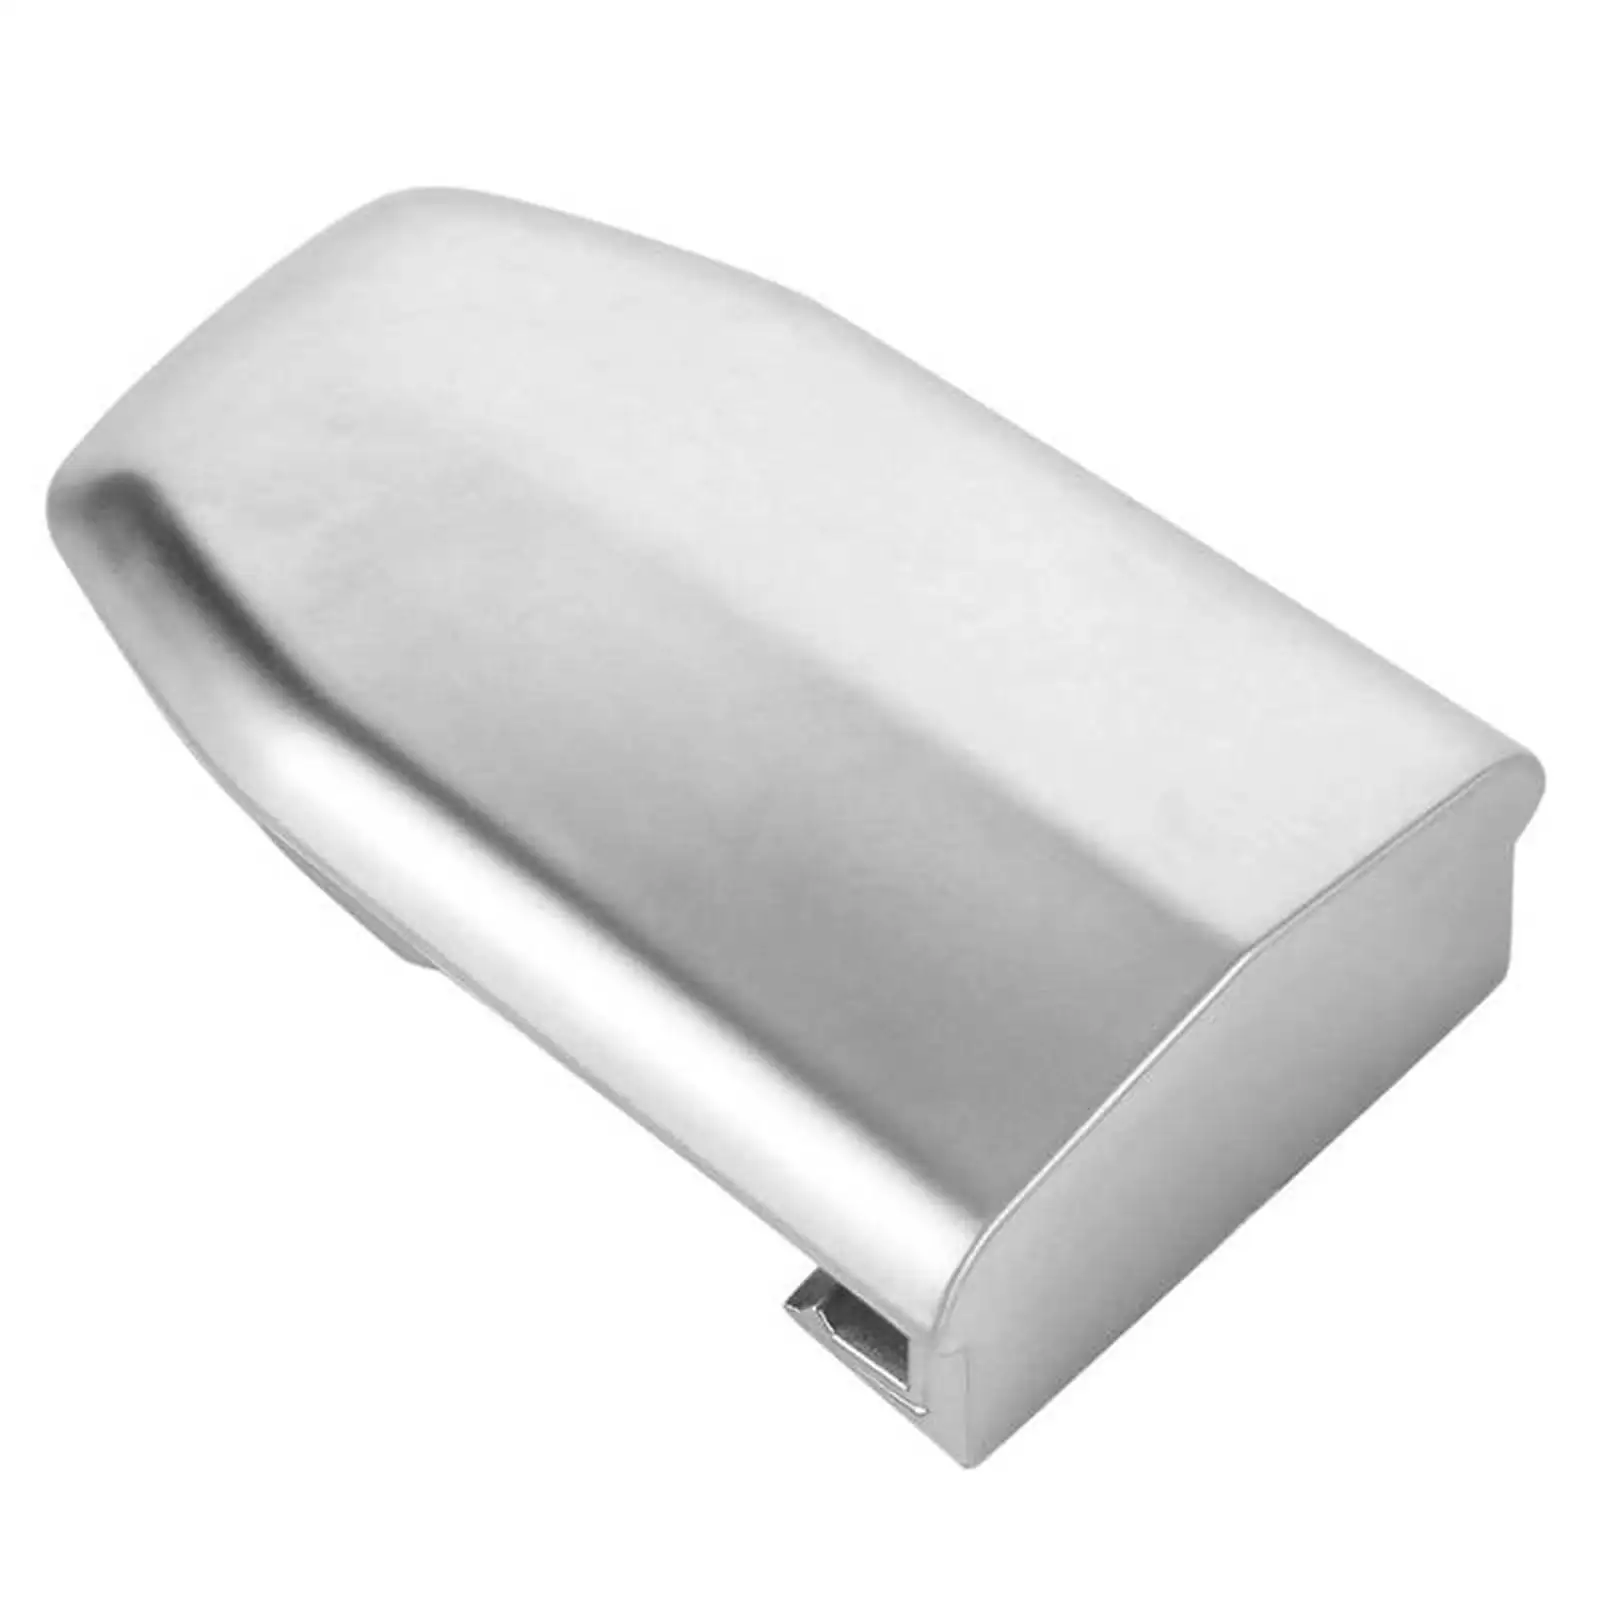 Auto Exterior Front Car Door Handle Lock Cylinder Cover 13596115 Chrome Silver for Escalade High Quality Accessory